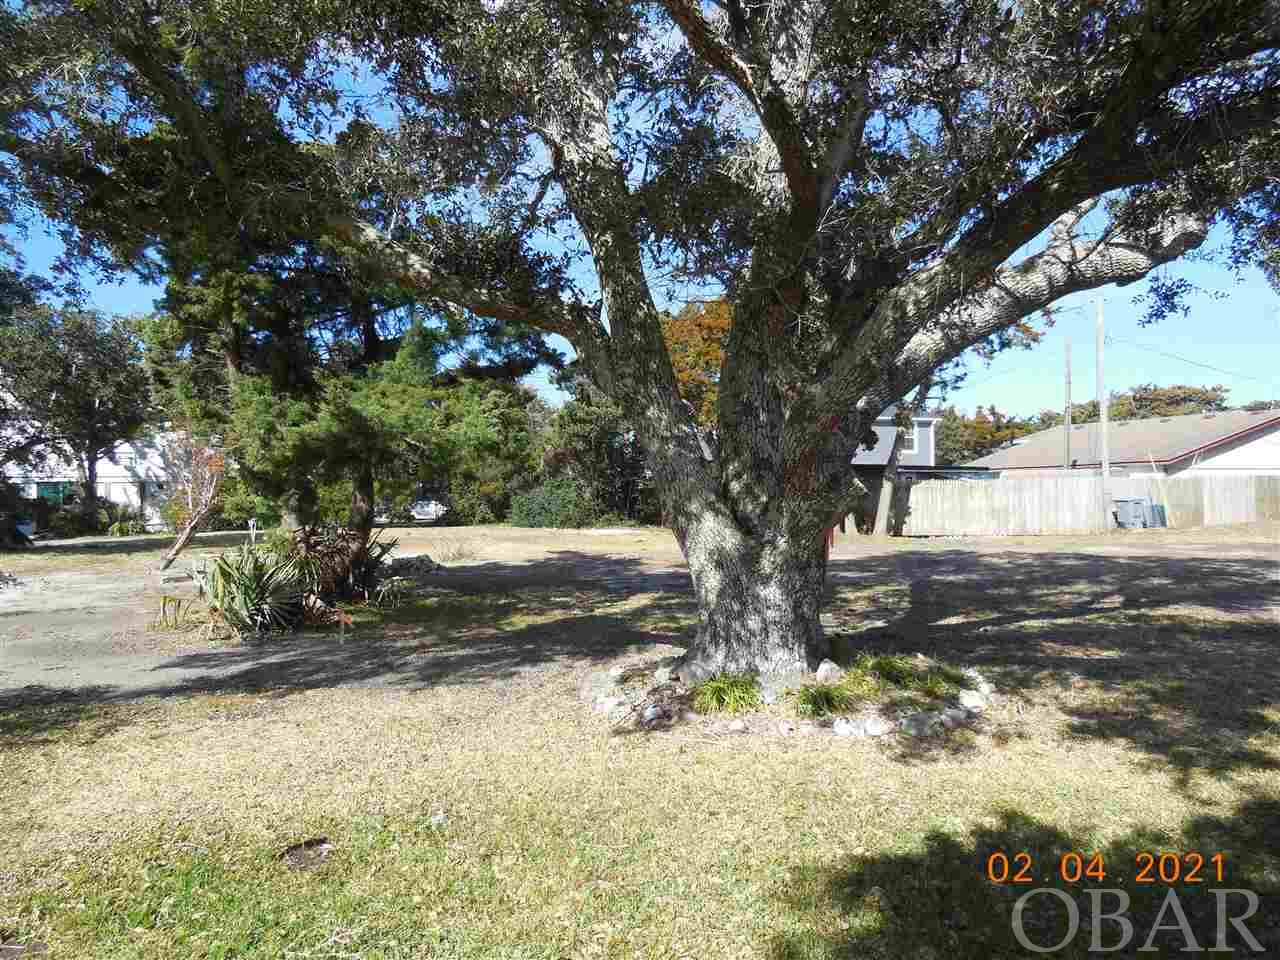 A 5297 sq. ft. lot in Live Oak Village, a new 7 lot subdivision in the heart of Ocracoke Village. A beautiful live oak stands tall and proud on this property. Conveniently located, close to all the island attractions. Bike or walk around the village, or take the tram. The tram stop is right around the corner for those busy summer months Choose from many coastal classic house designs! Restrictive covenants in place to maintain the historic charm and quaintness of Ocracoke Village.